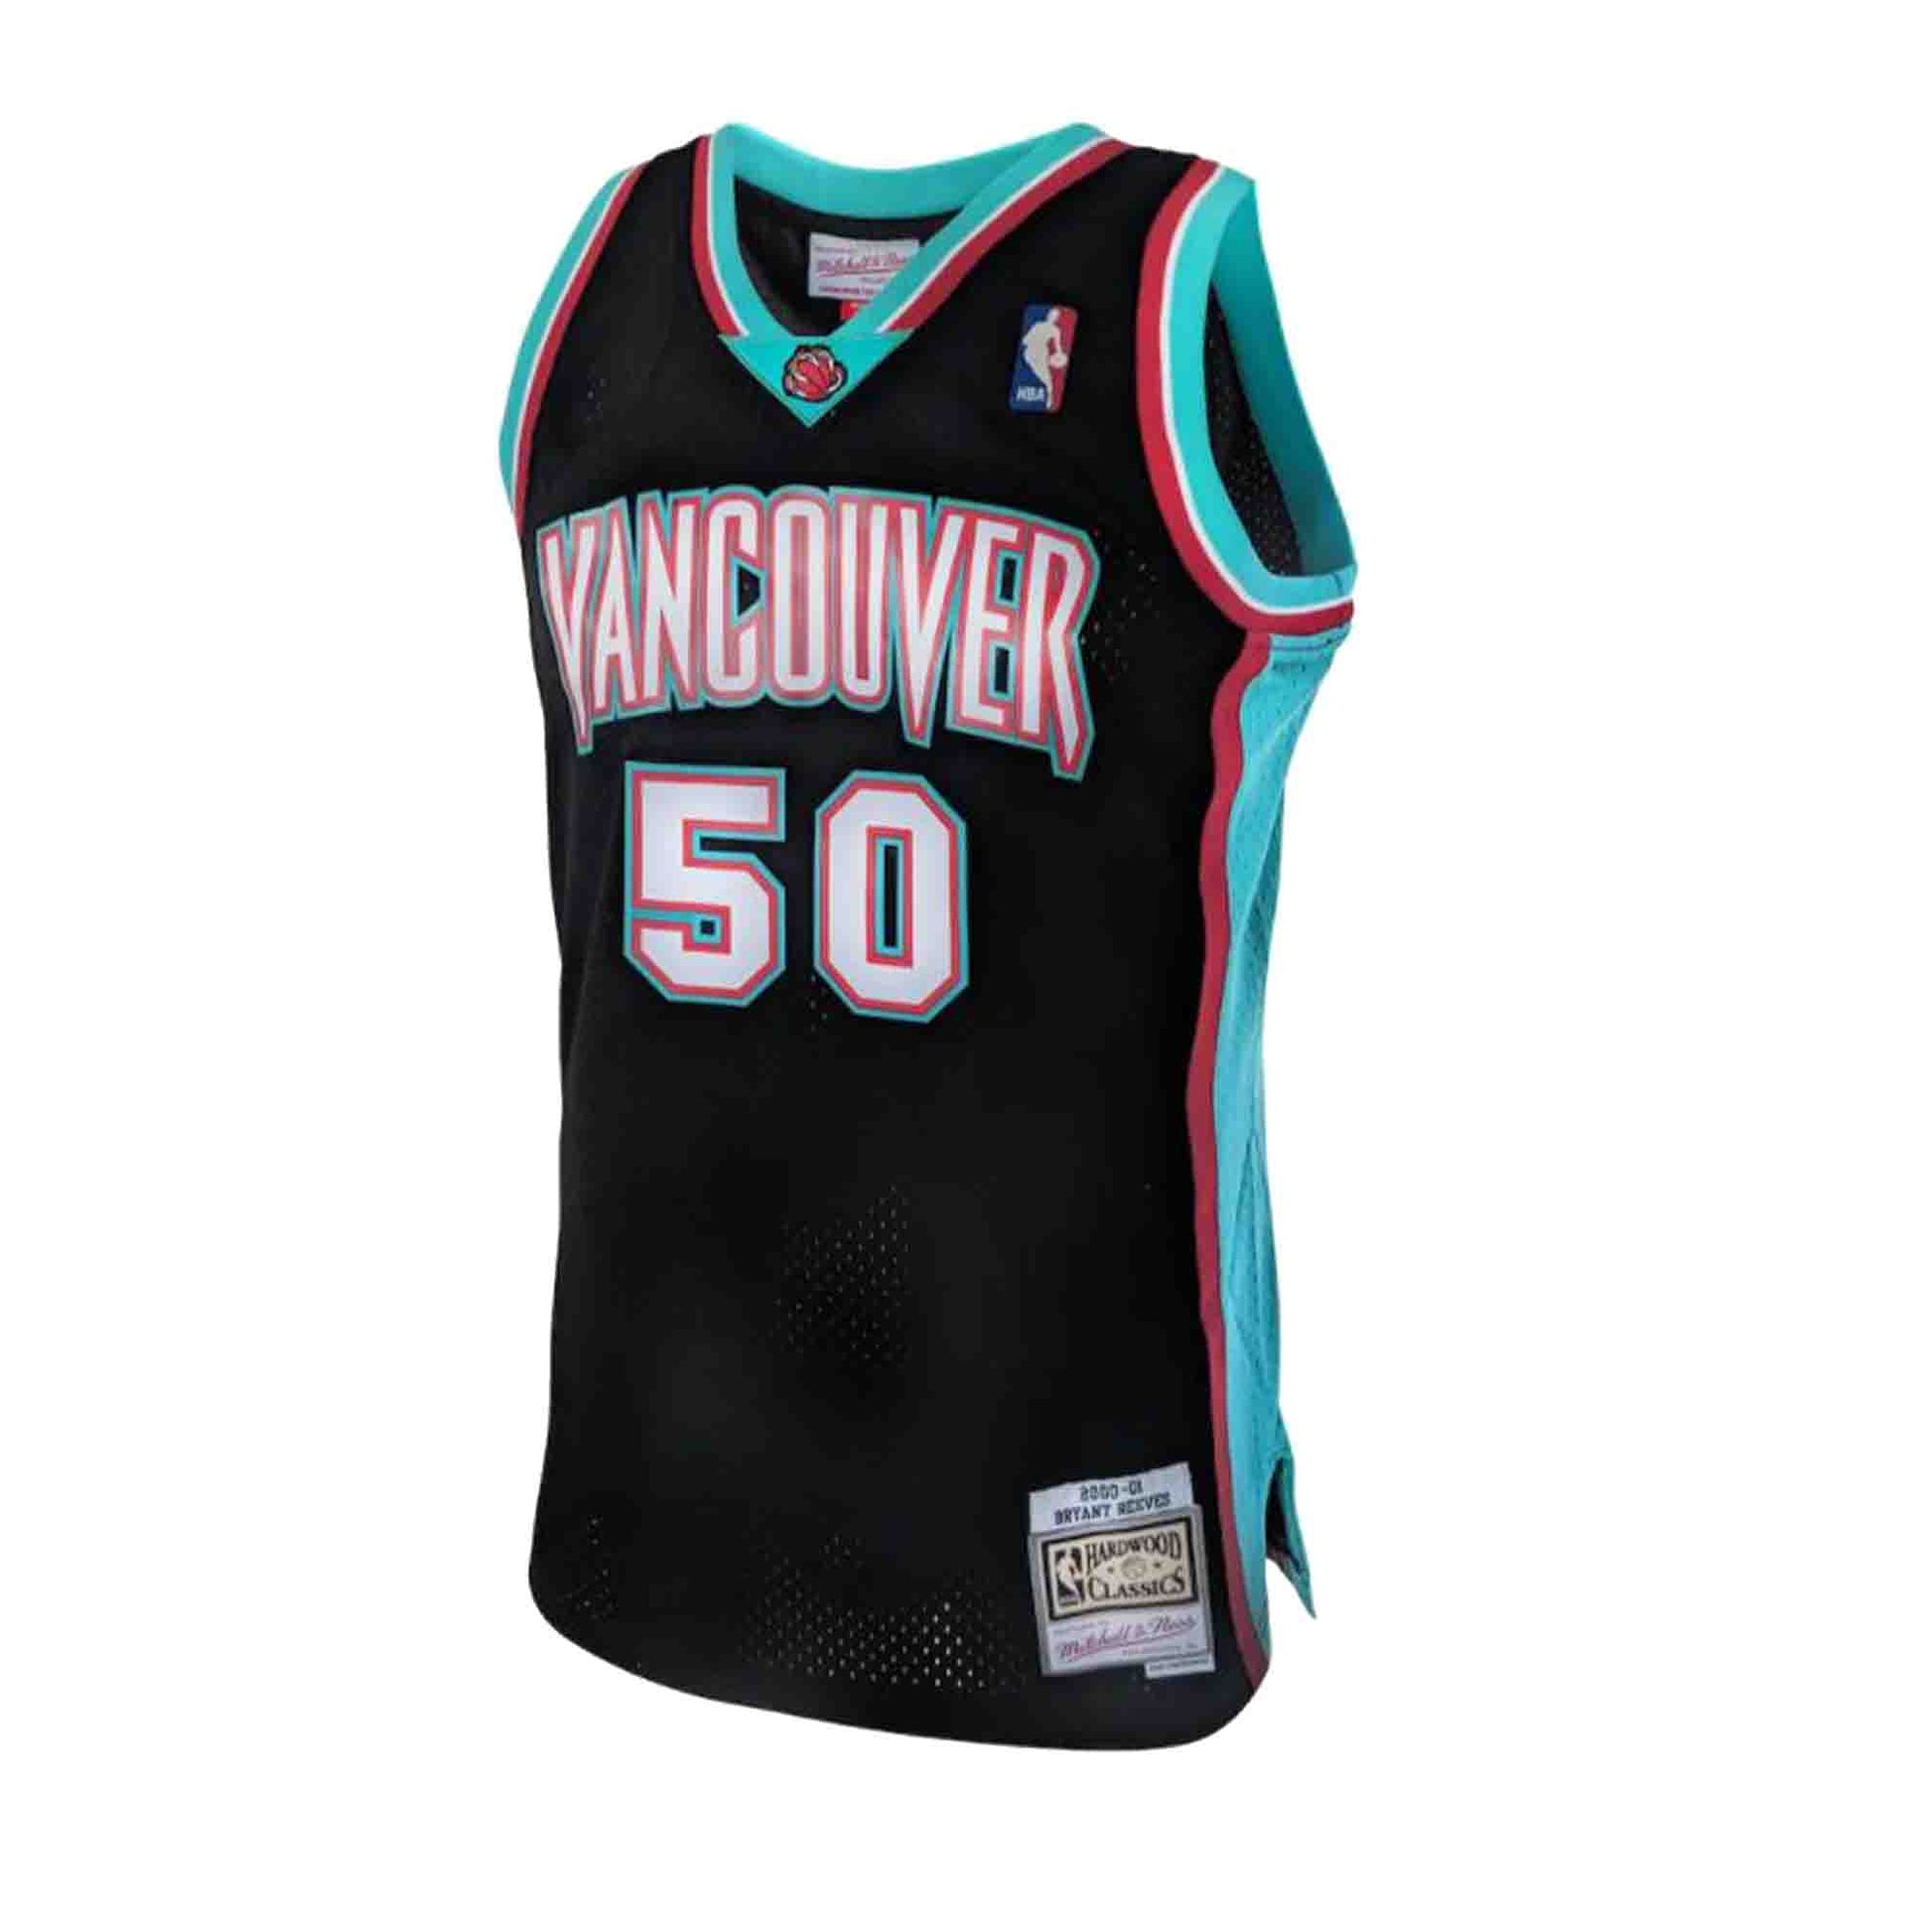 grizzlies jersey red